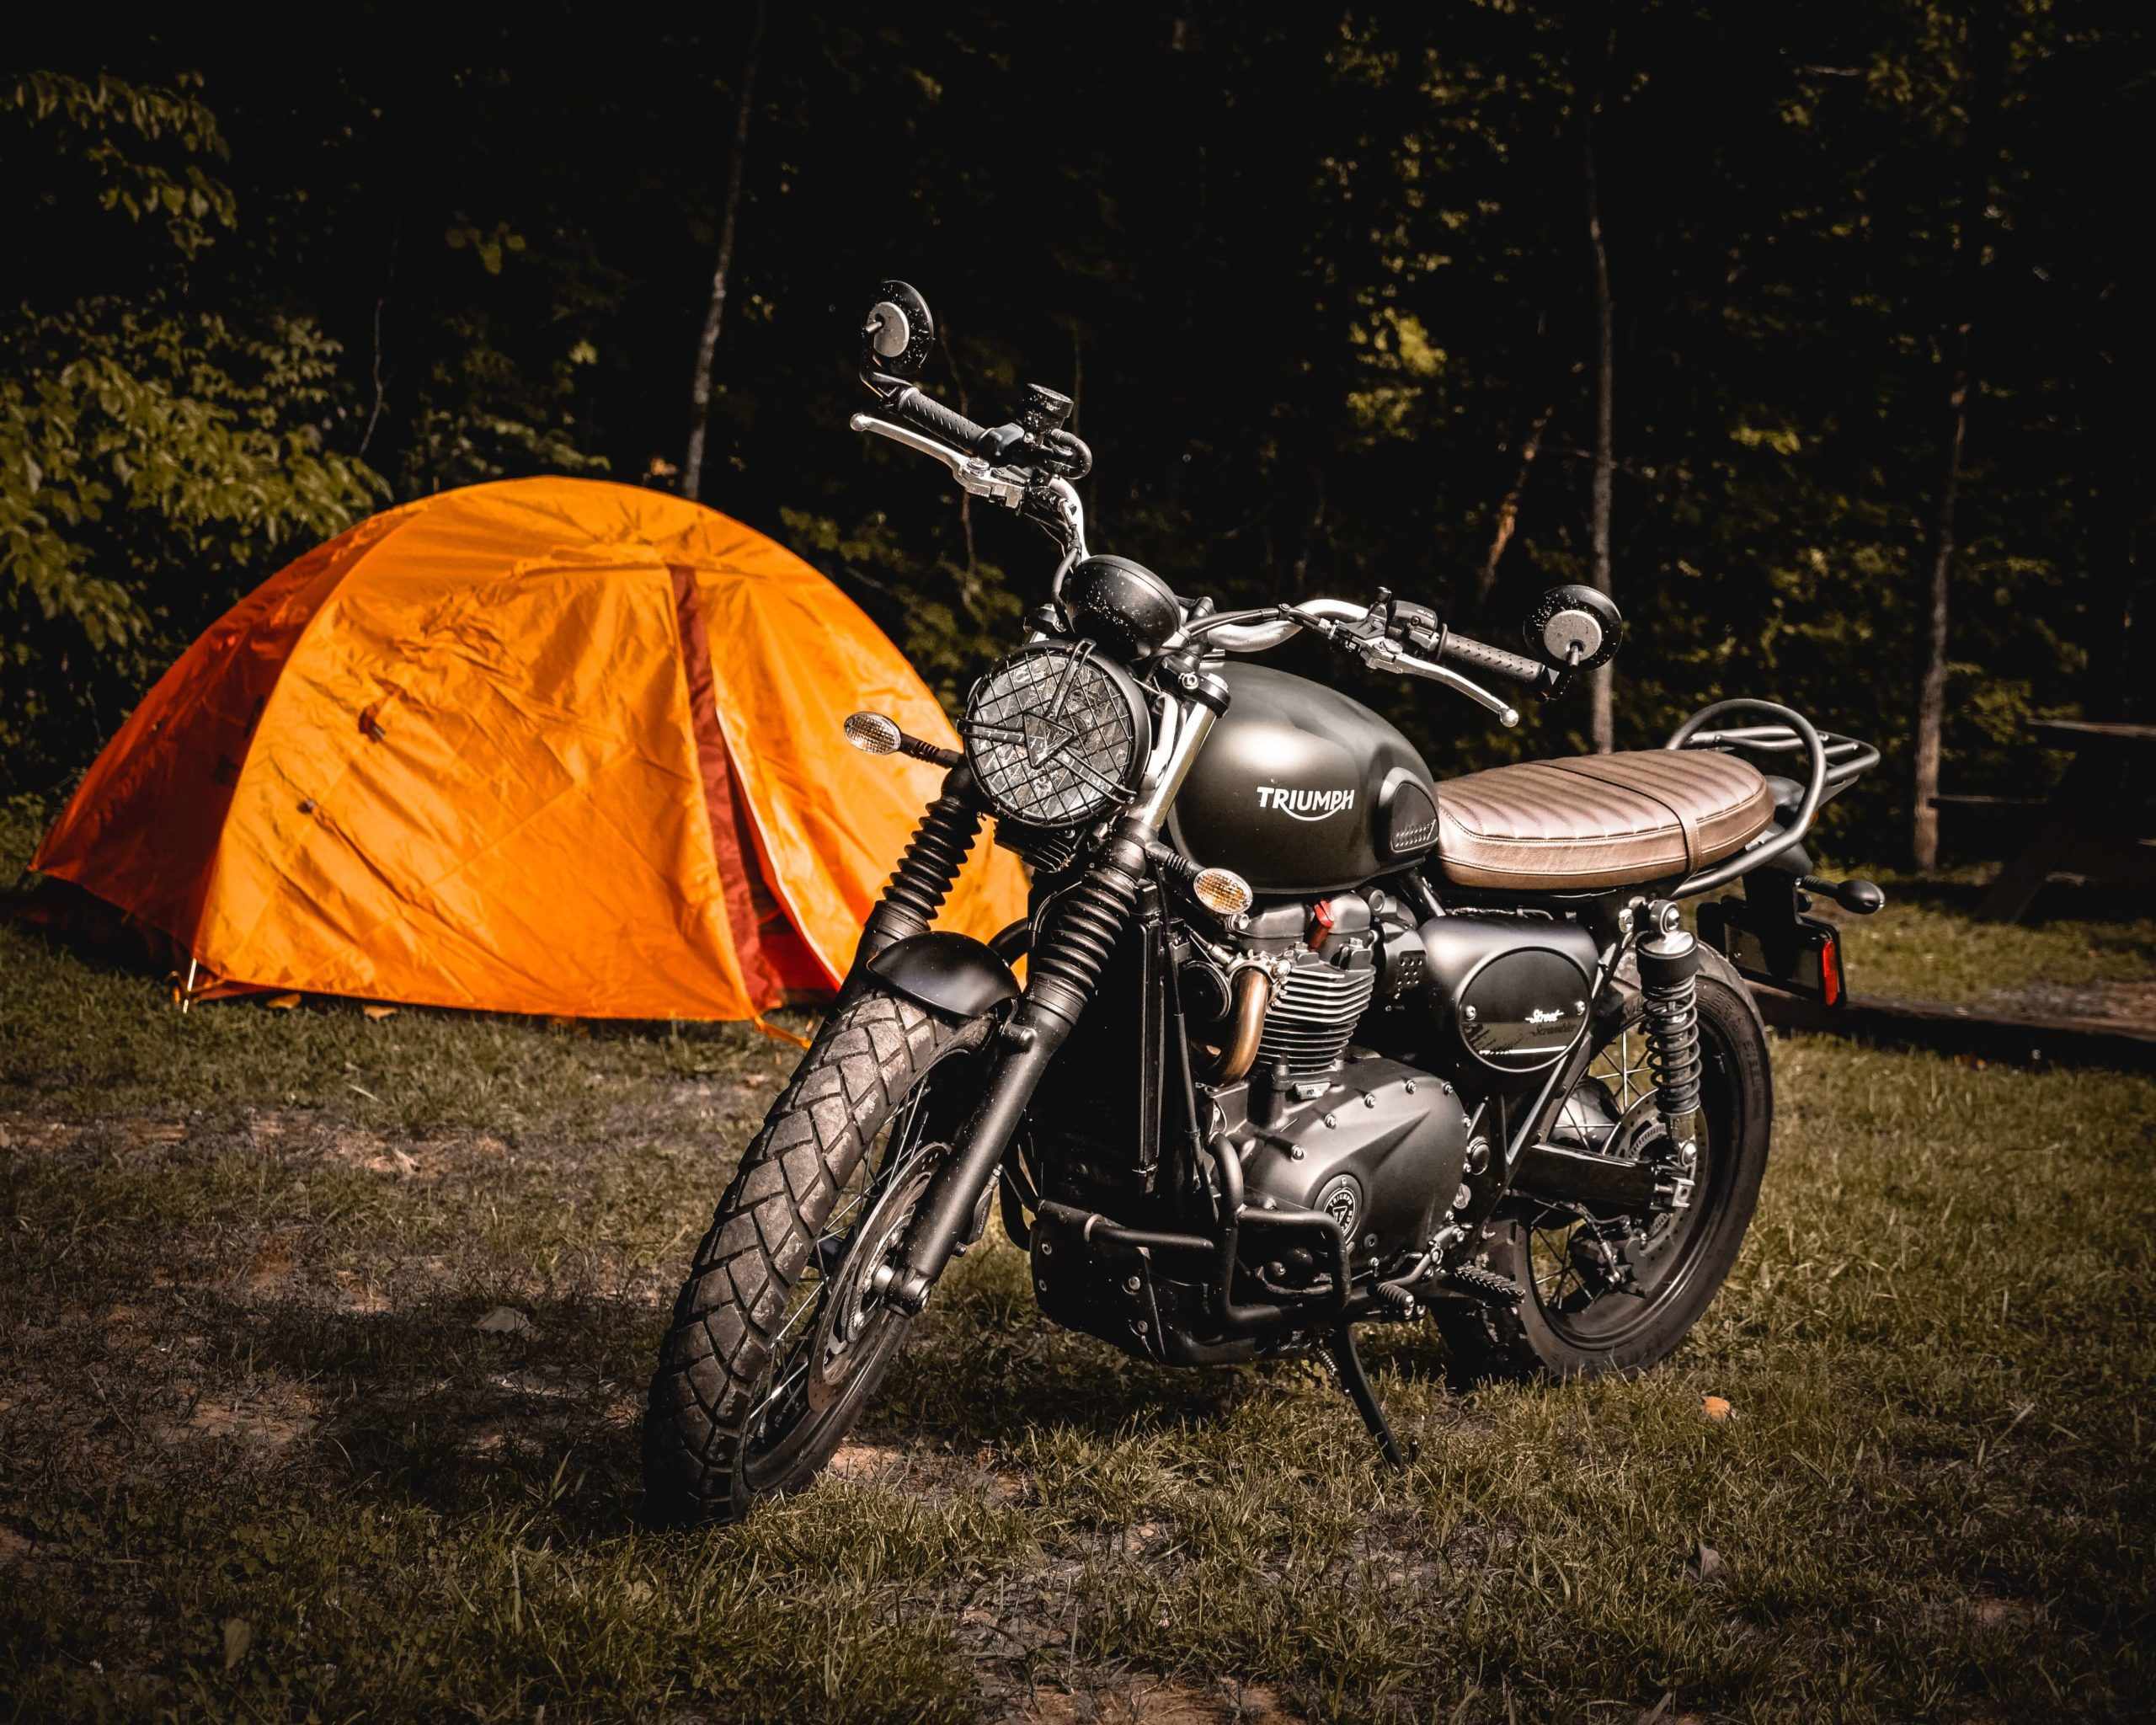 Motorcycle Camper Trailers: For Camping or Cargo